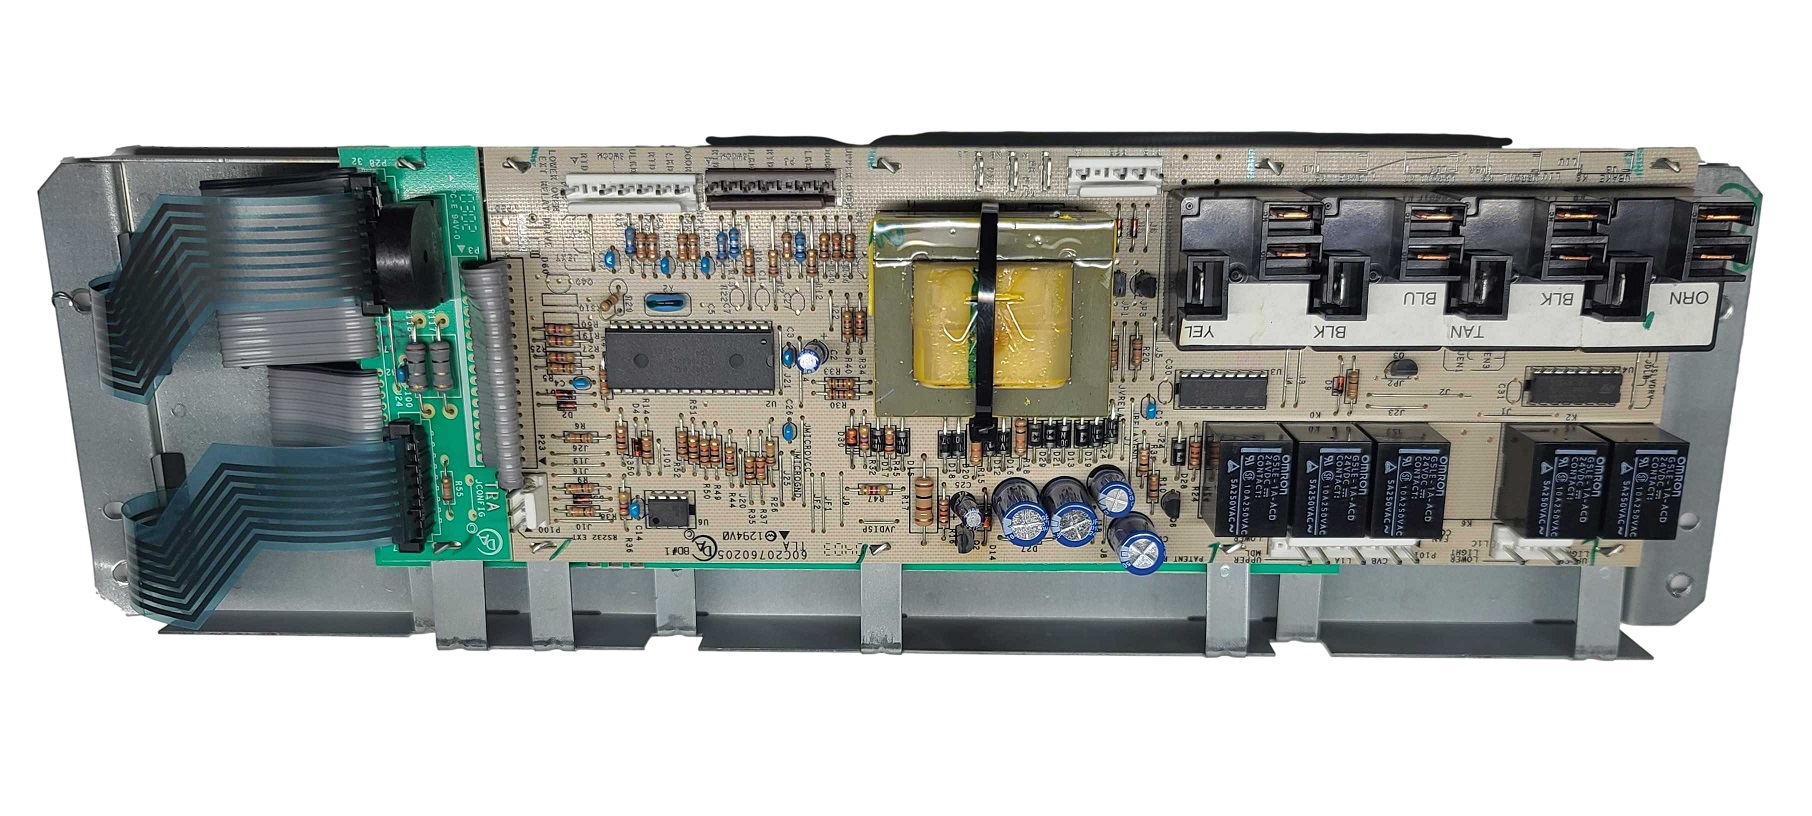 Range Control Board 74007350 Repair Service For Maytag Oven 